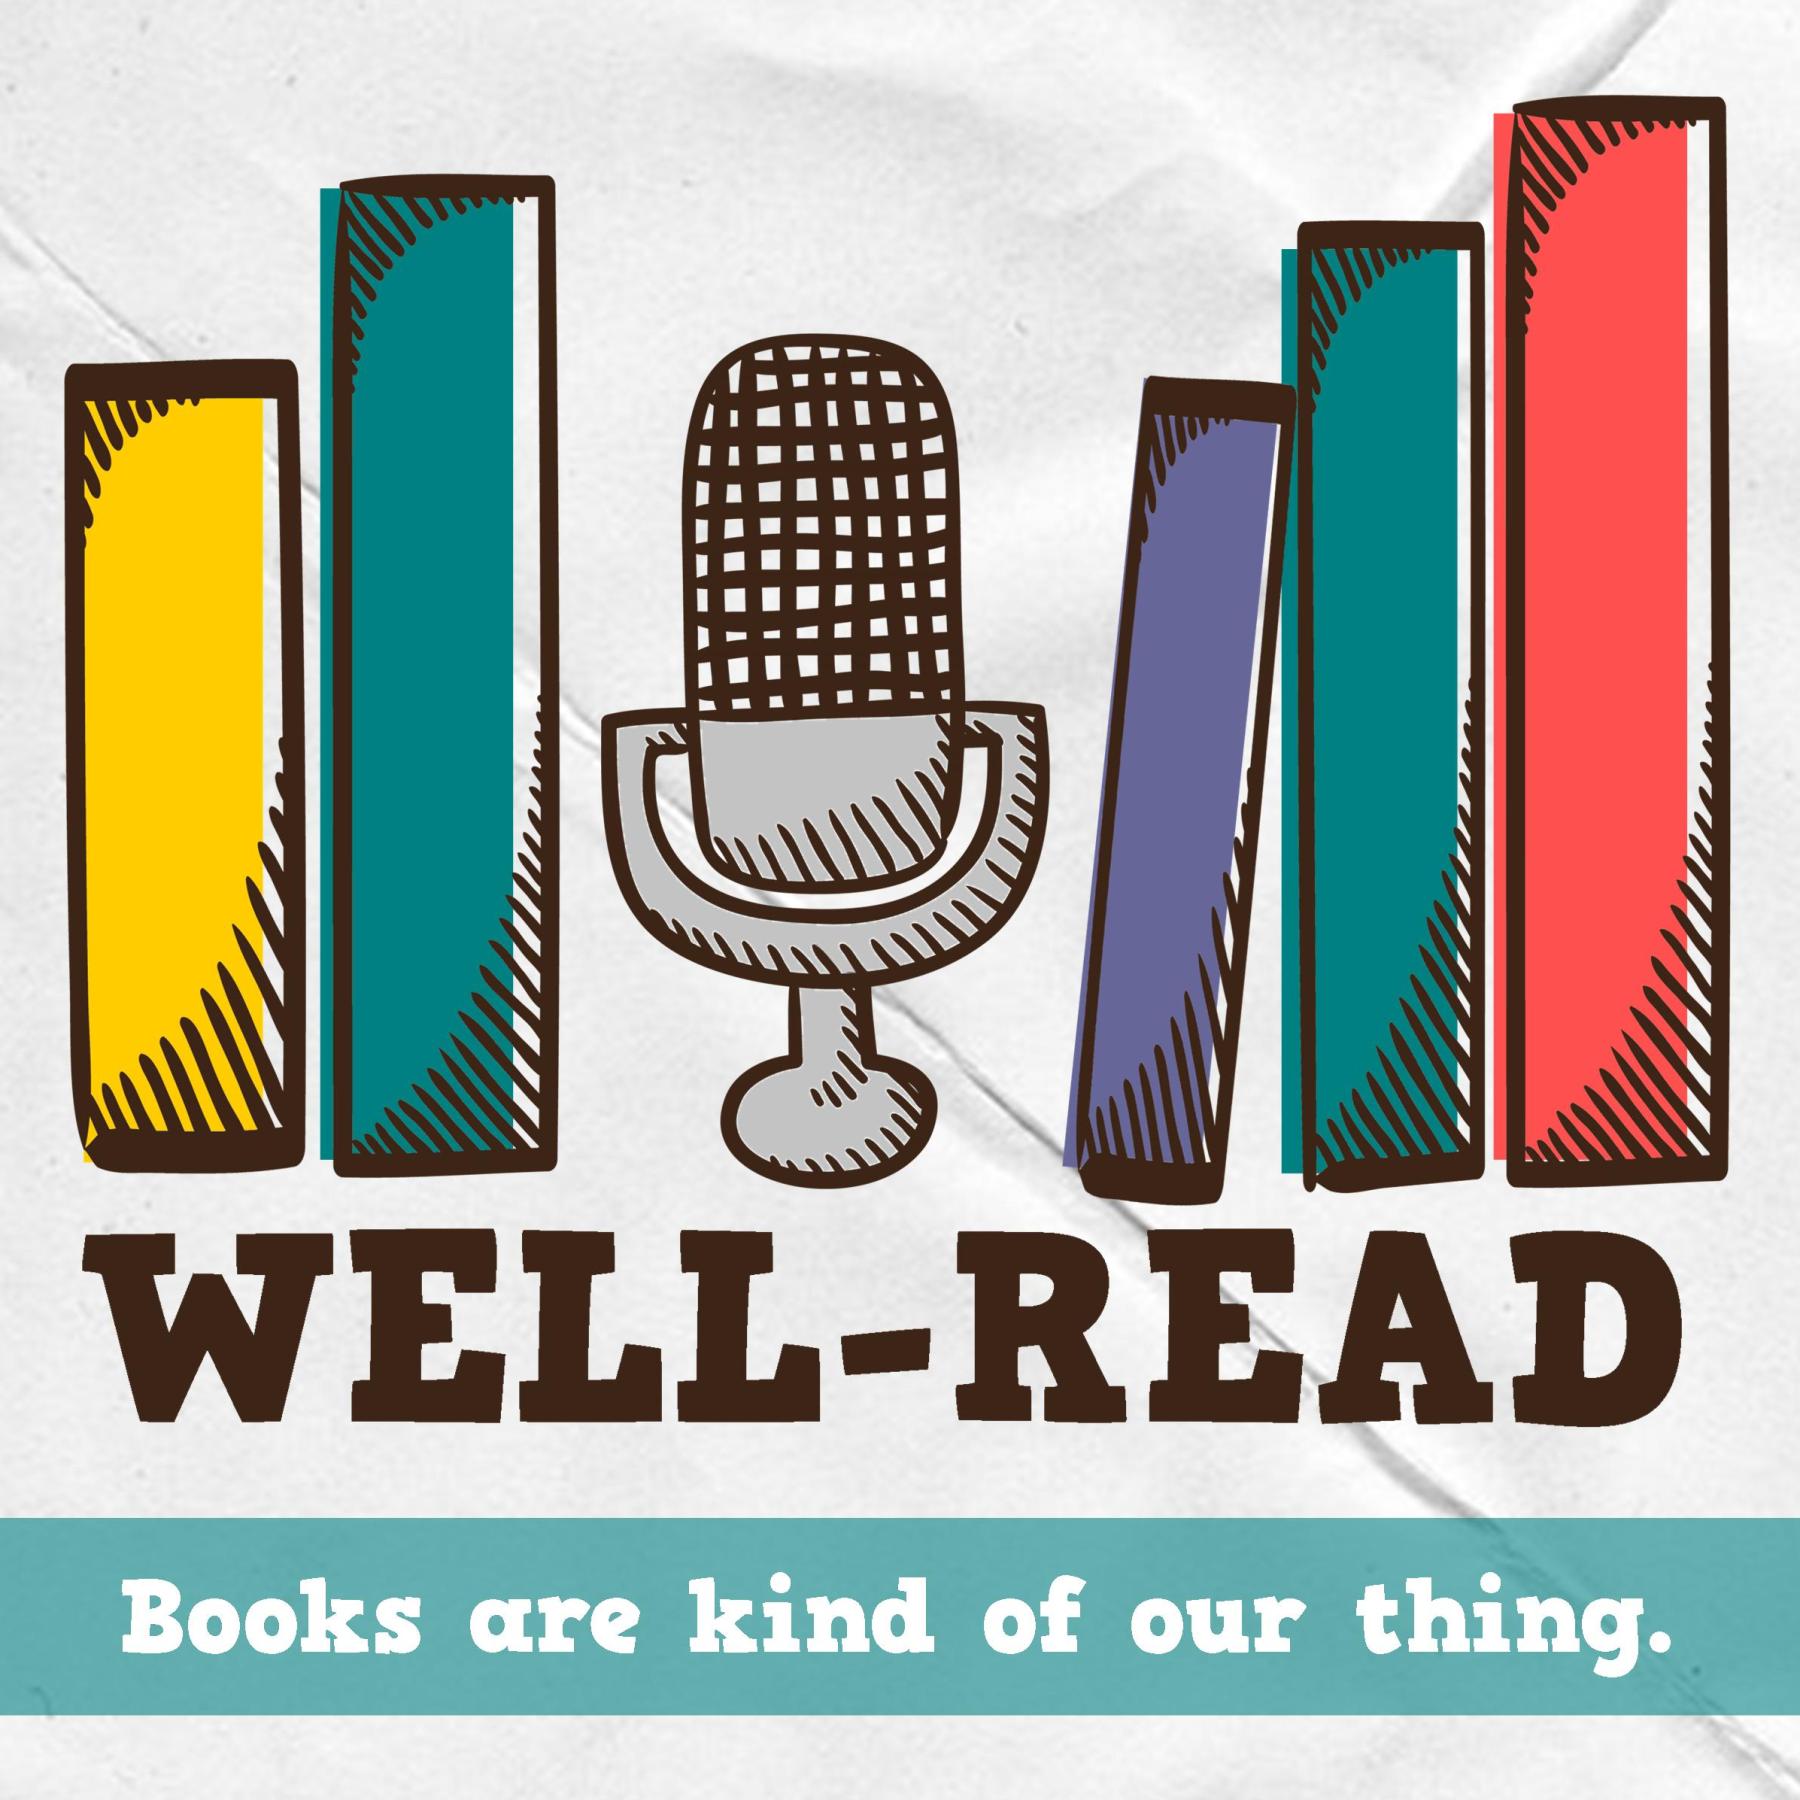 Well-Read episode #12 - Ordinary People, Extraordinary Lives